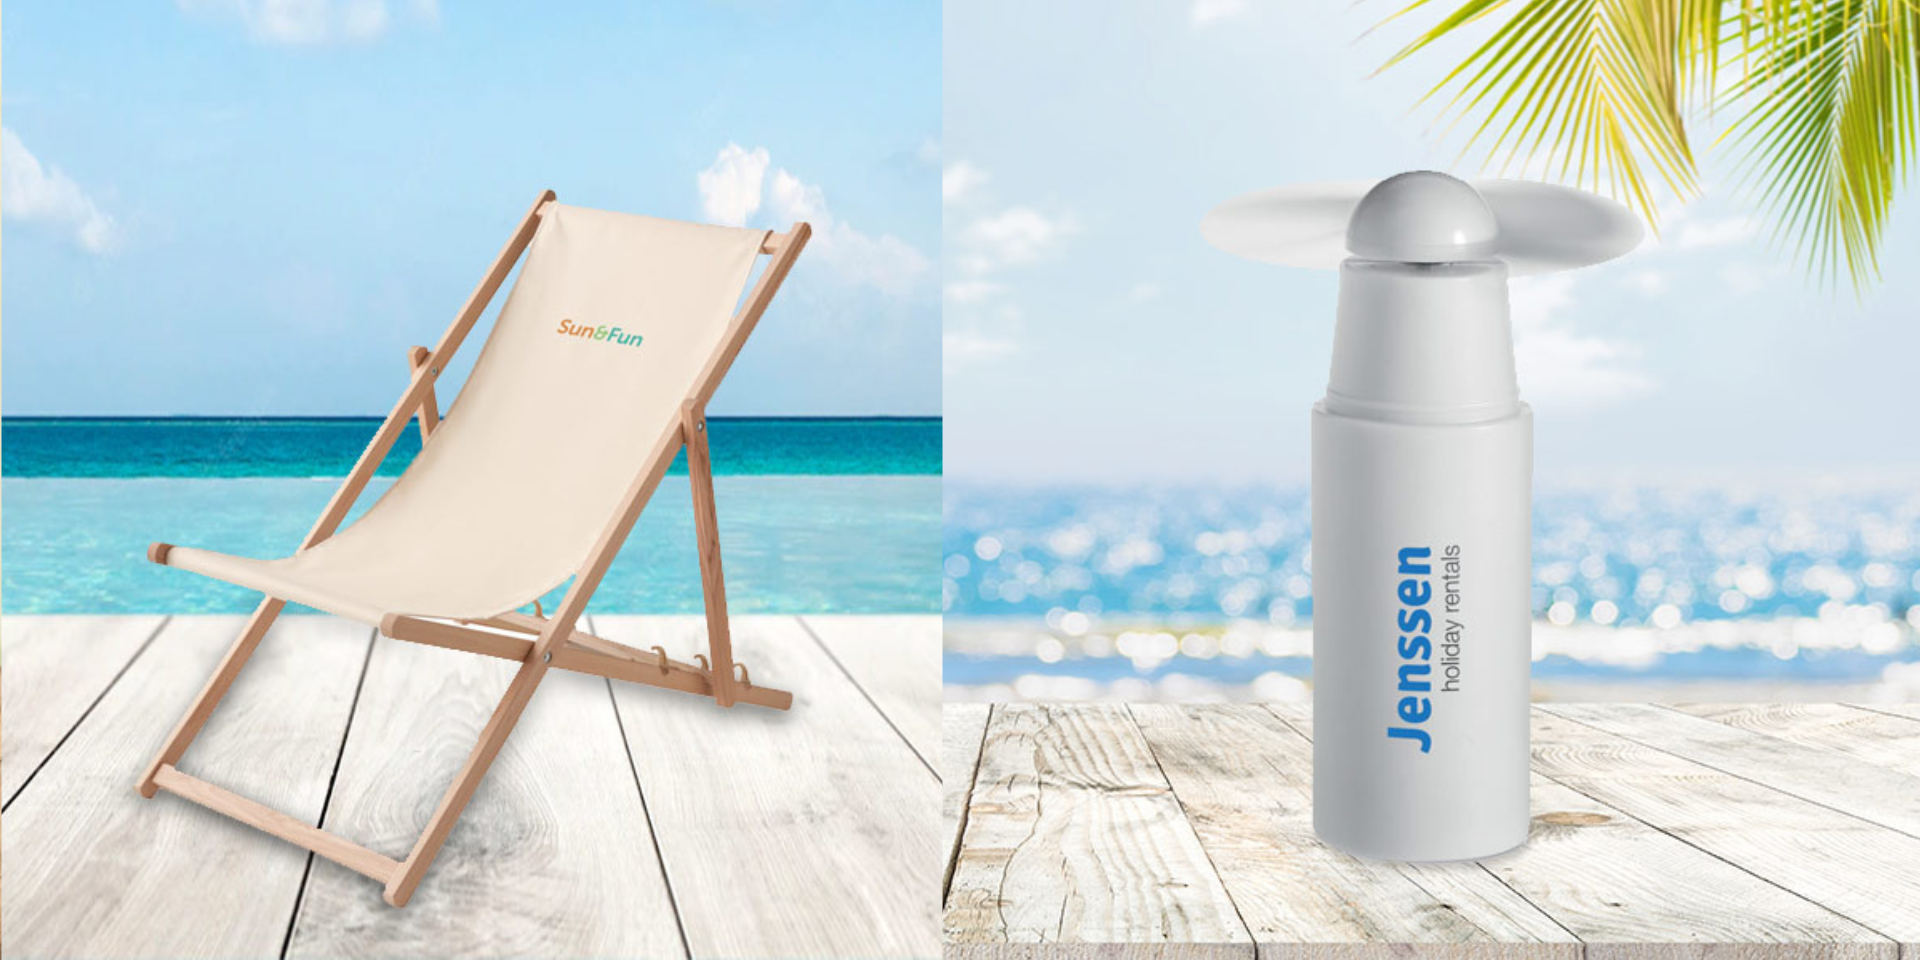 Branded beach giveaways